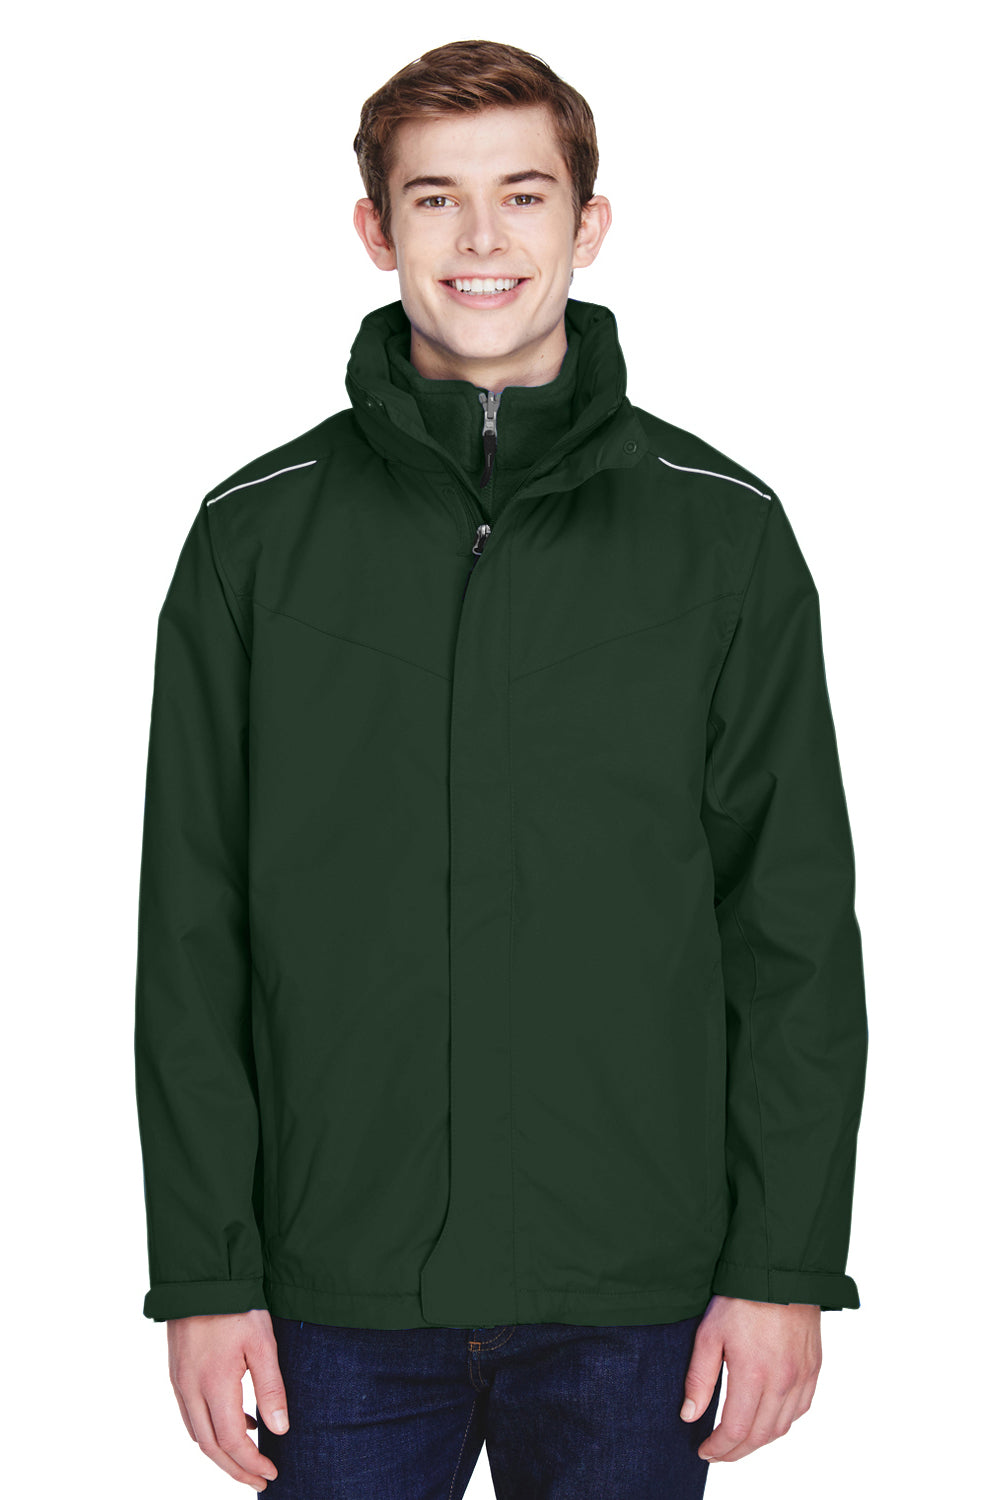 Core 365 88205 Mens Region 3-in-1 Water Resistant Full Zip Hooded Jacket Forest Green Front